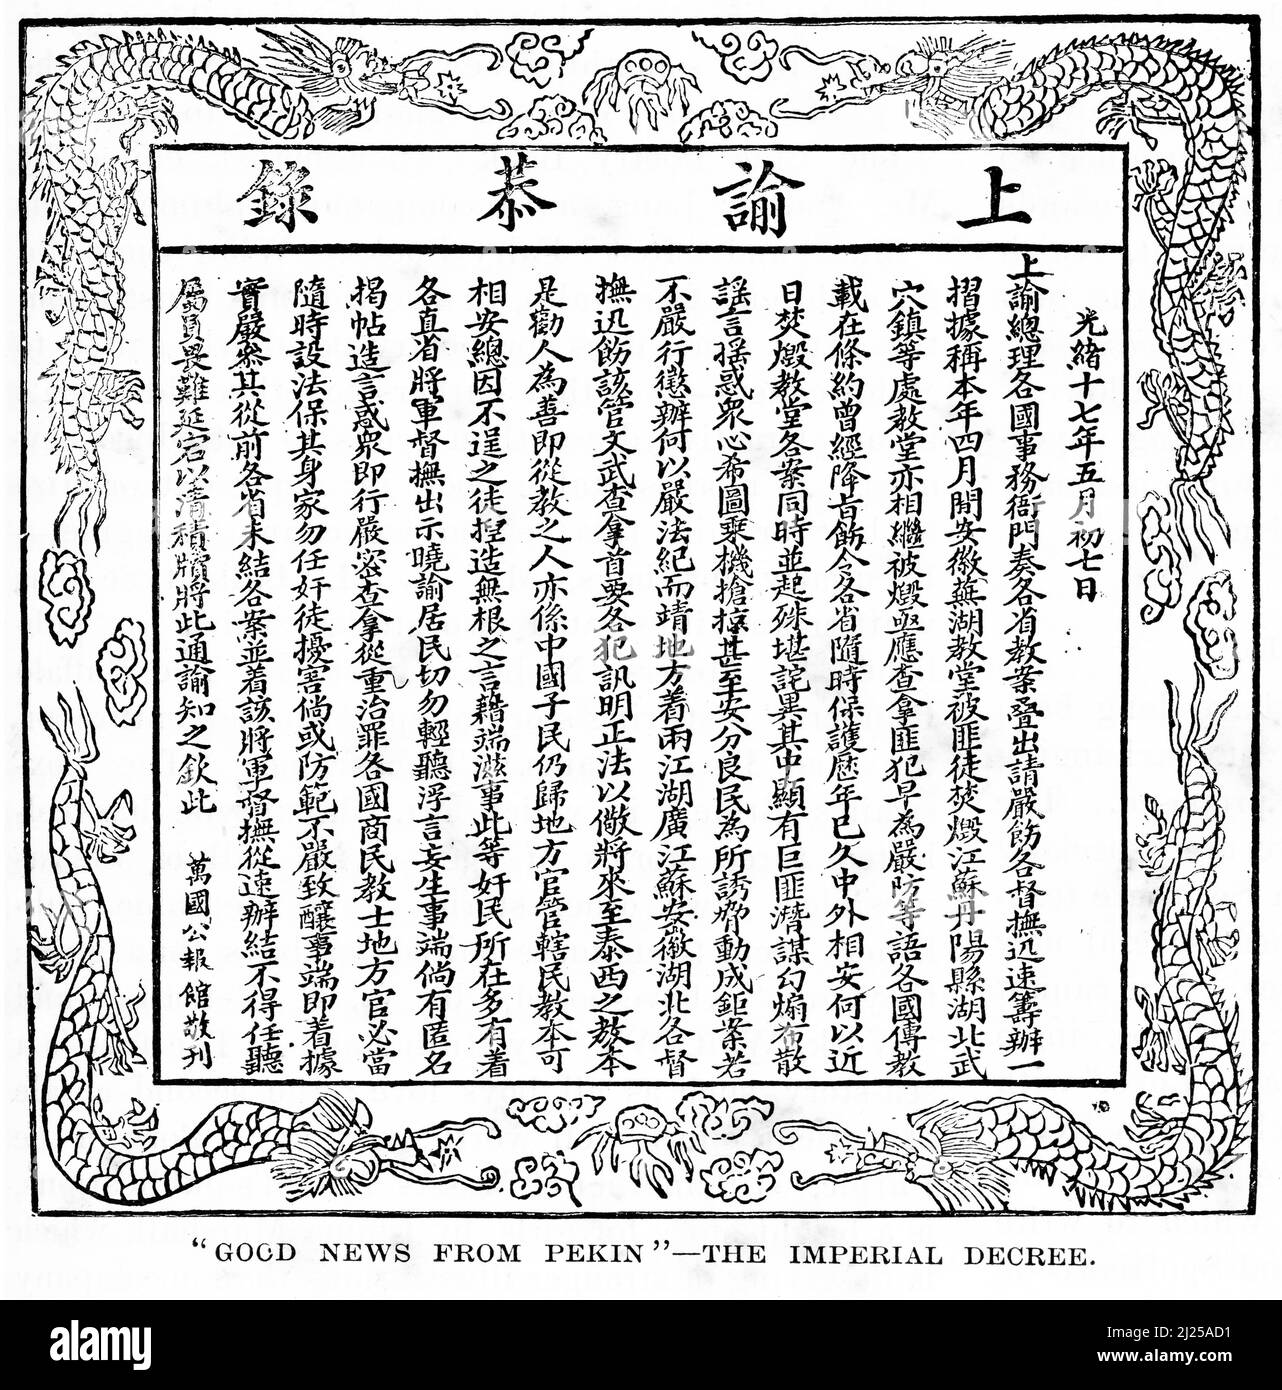 Engraving of an imperial degree in Chinese, circa 1890 Stock Photo